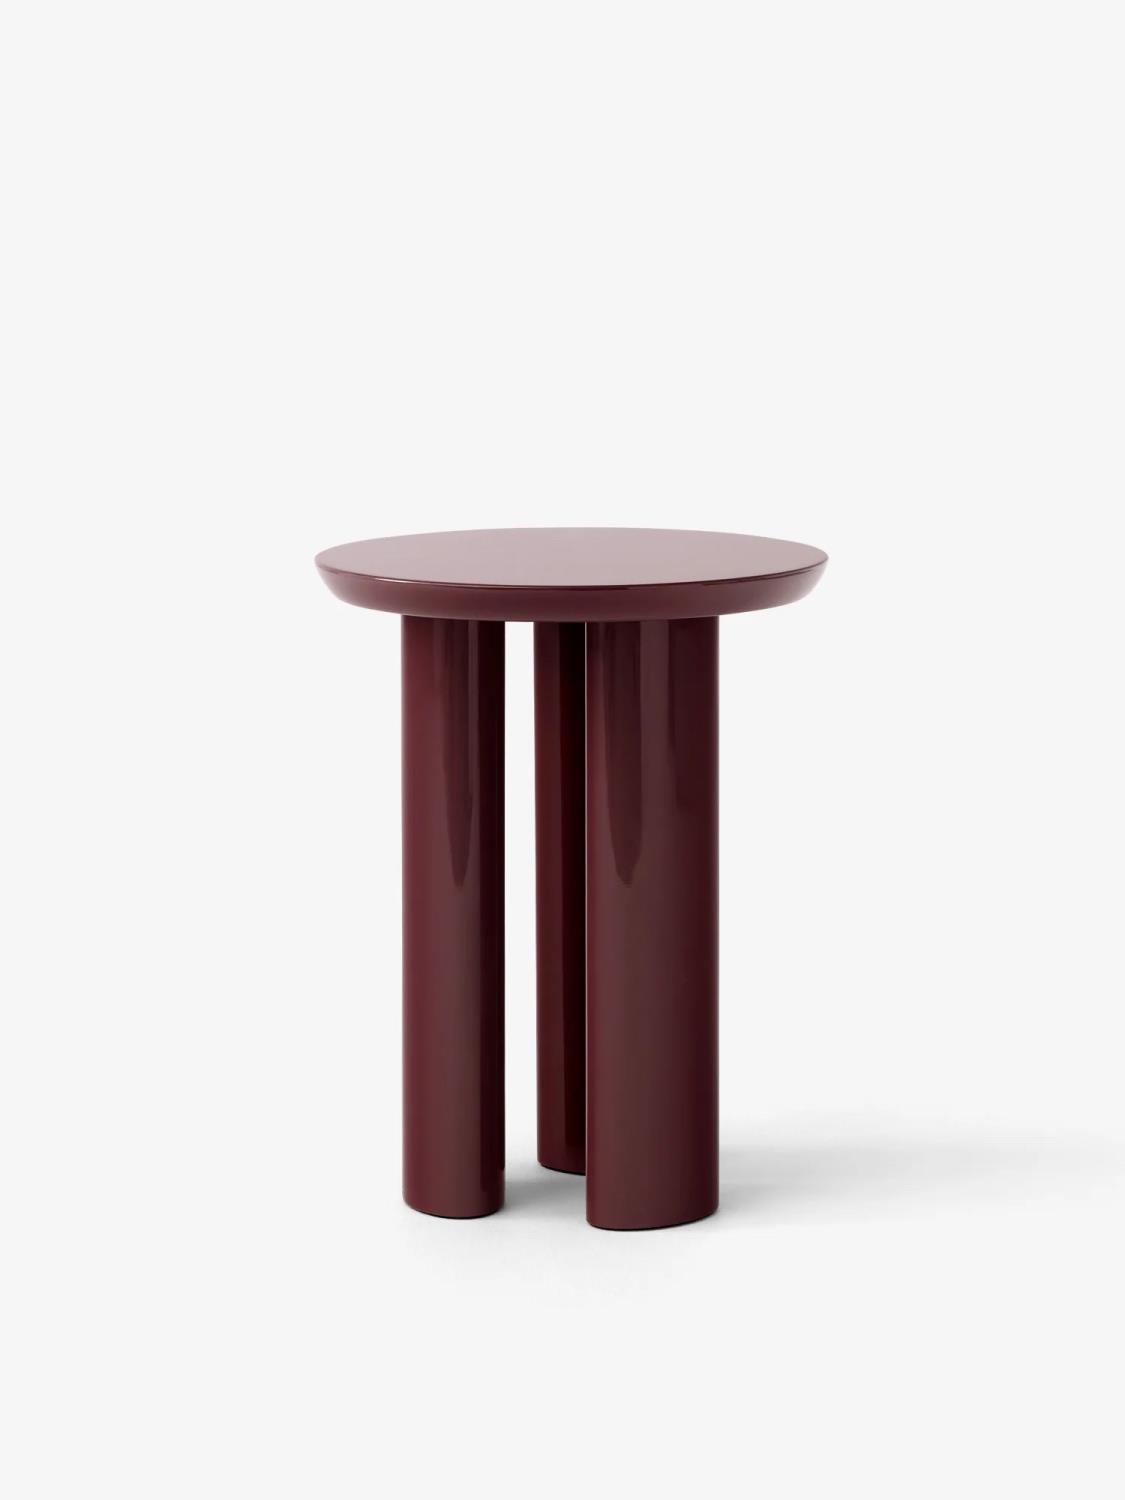 &Tradition - Tung Table JA3 - Burgundy Red